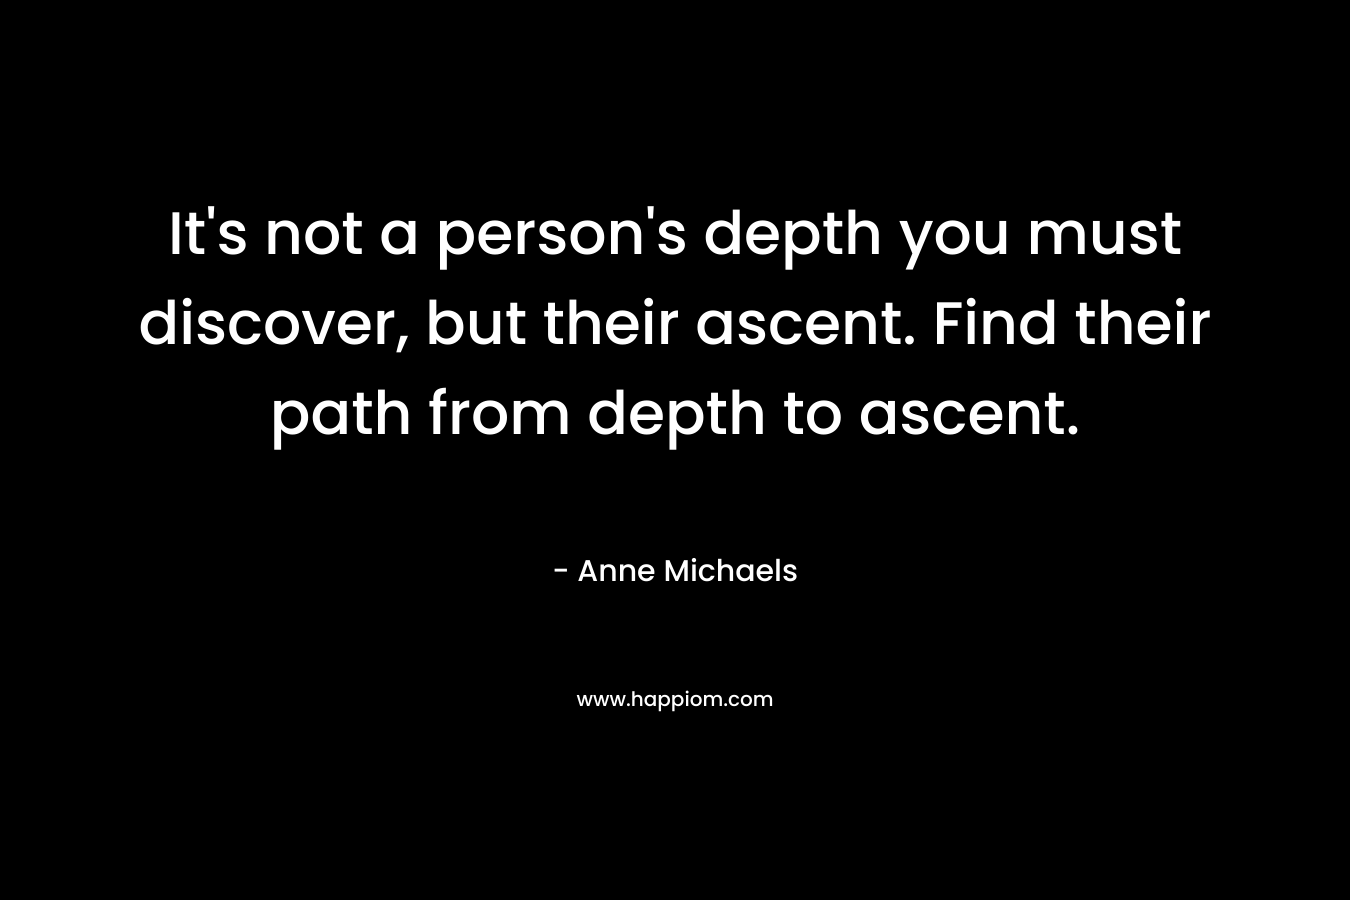 It's not a person's depth you must discover, but their ascent. Find their path from depth to ascent.